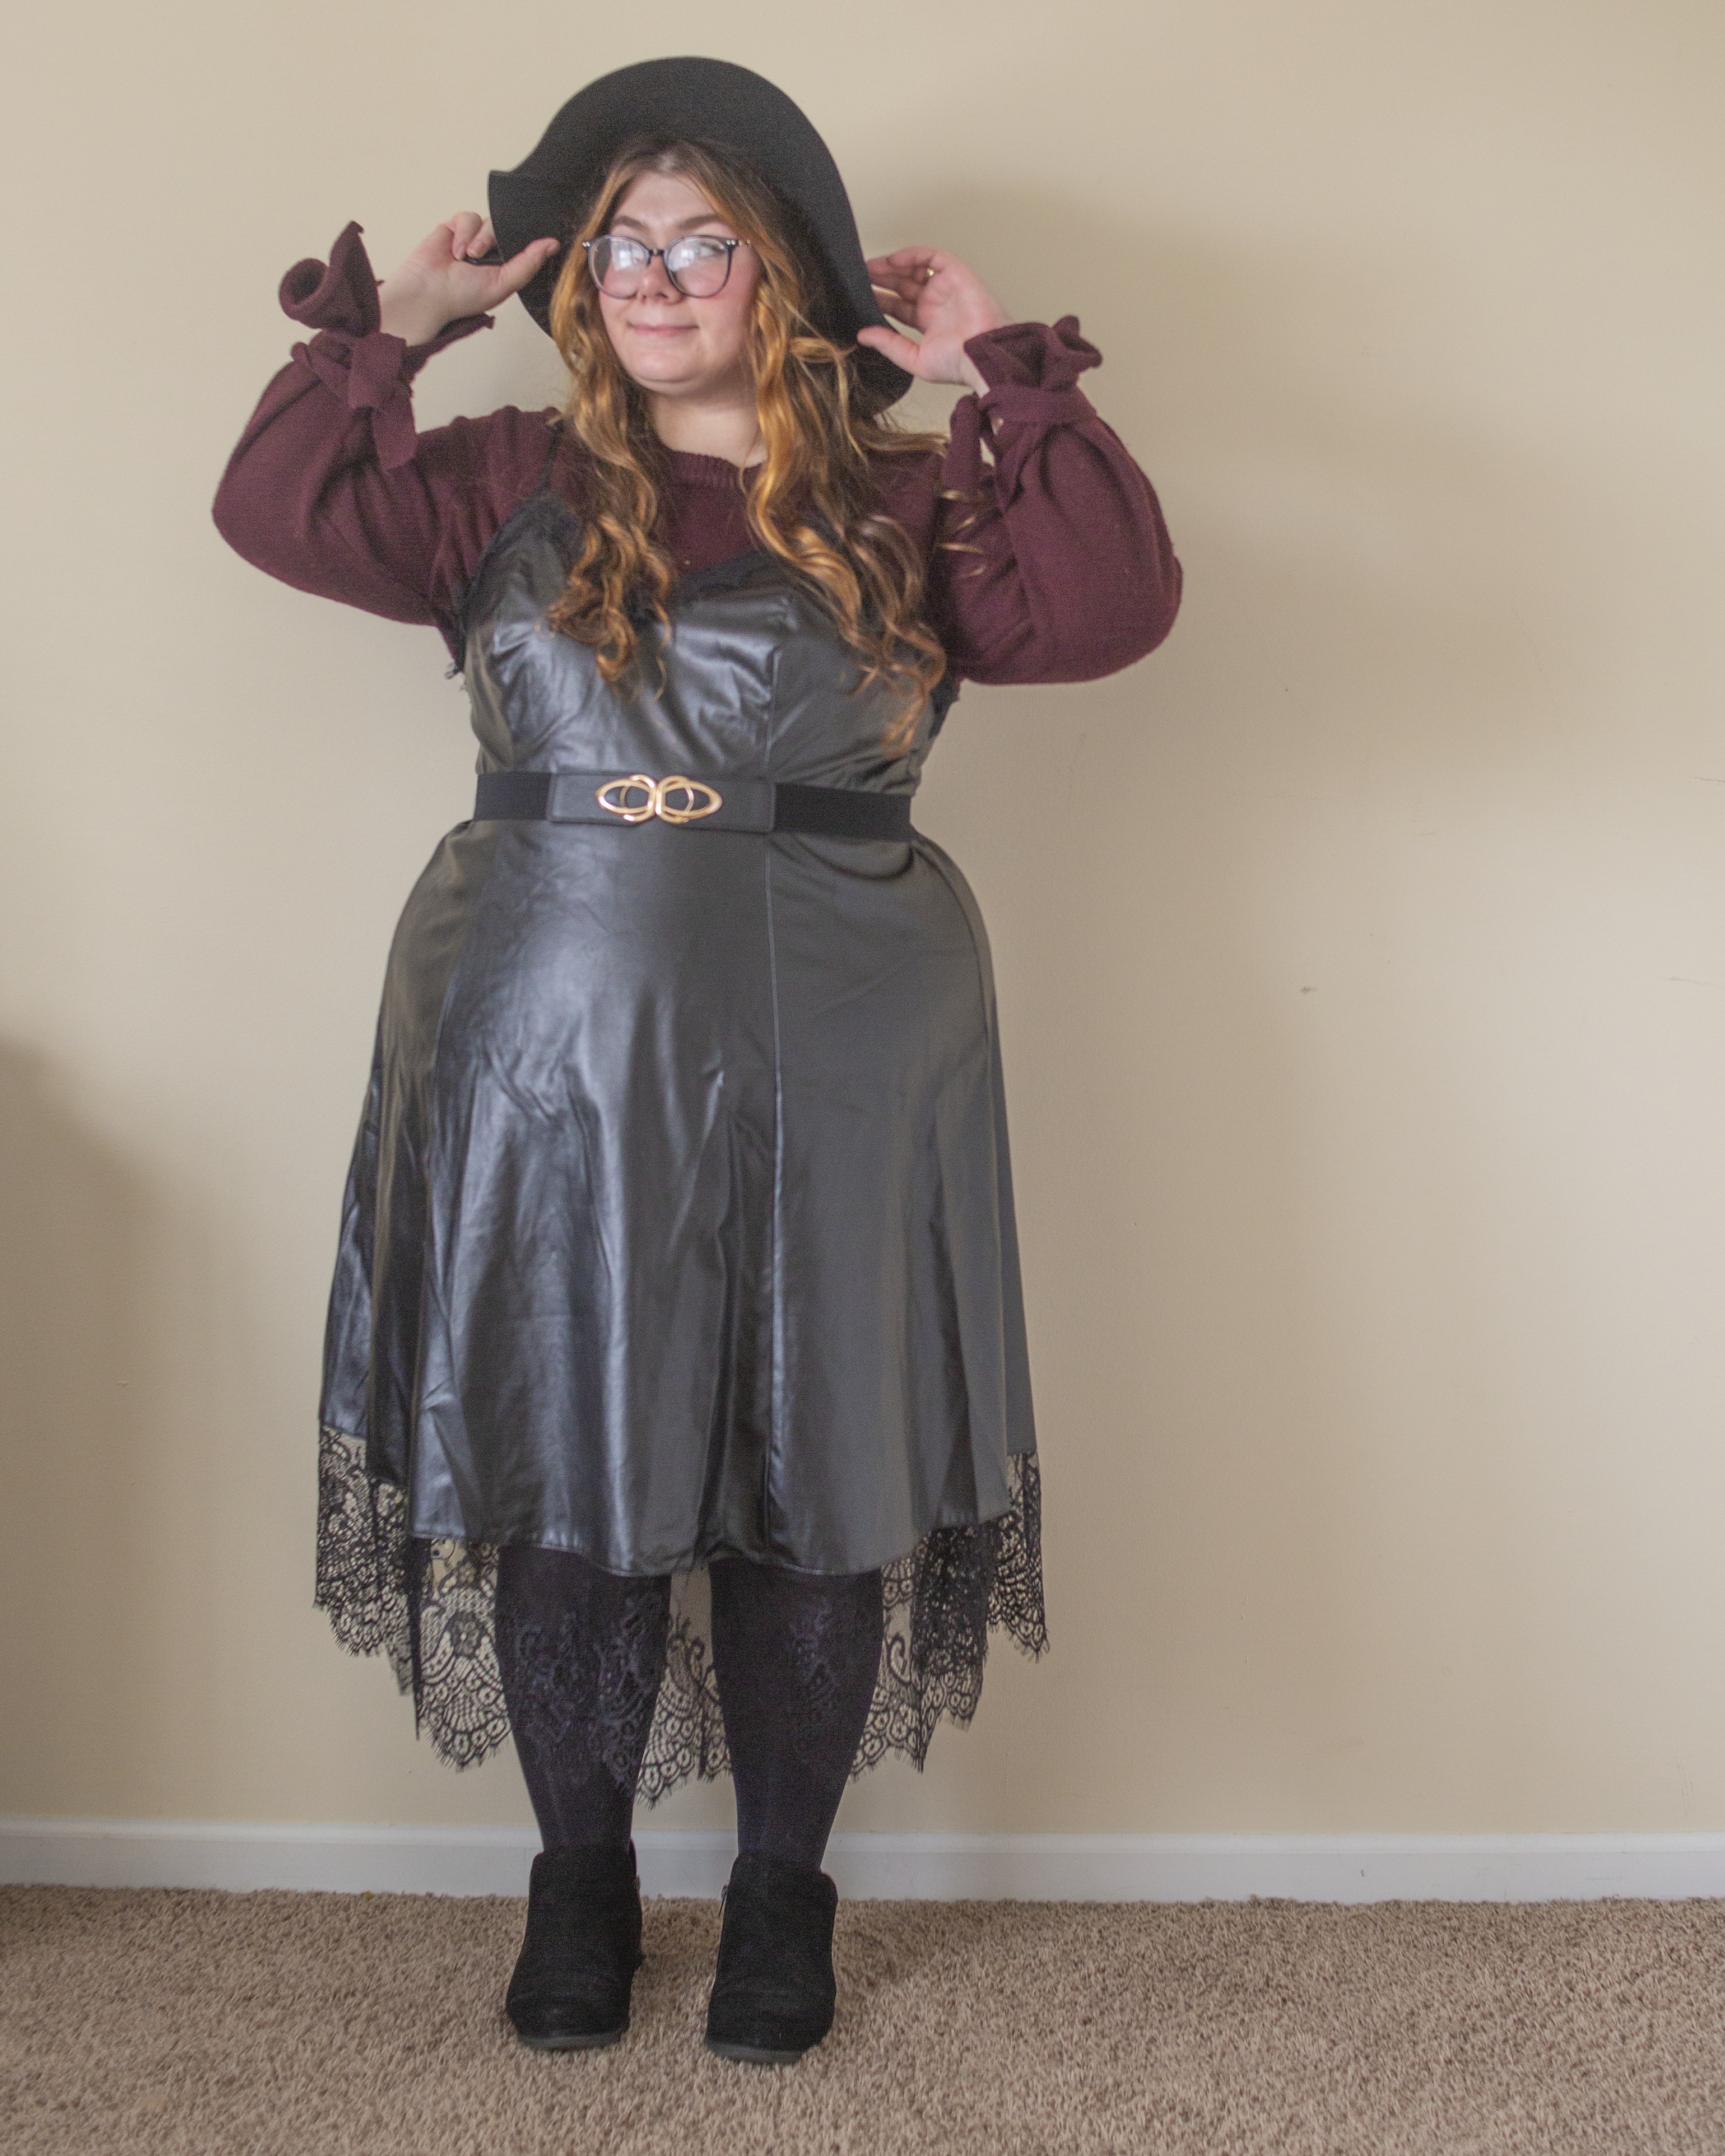 An outfit consisting of a berry knit sweater with ties around the wrists under a black leather midi dress with black lace trim, black tights and black boots.